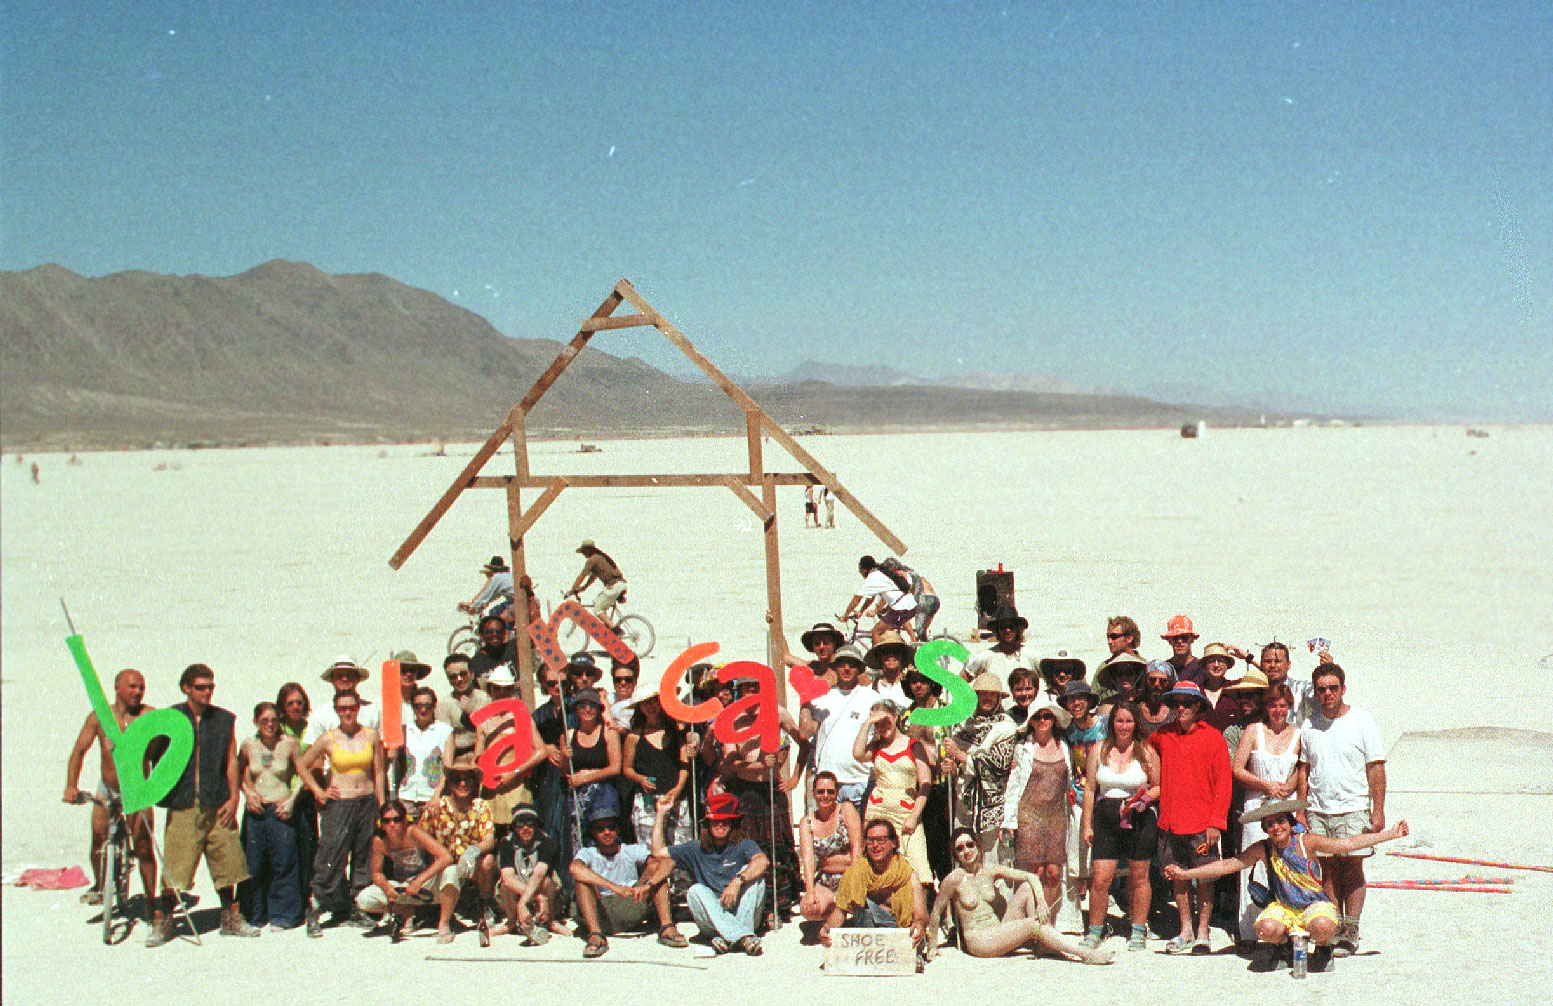 Image of Burning Man 1999 - Oh The Infamy!